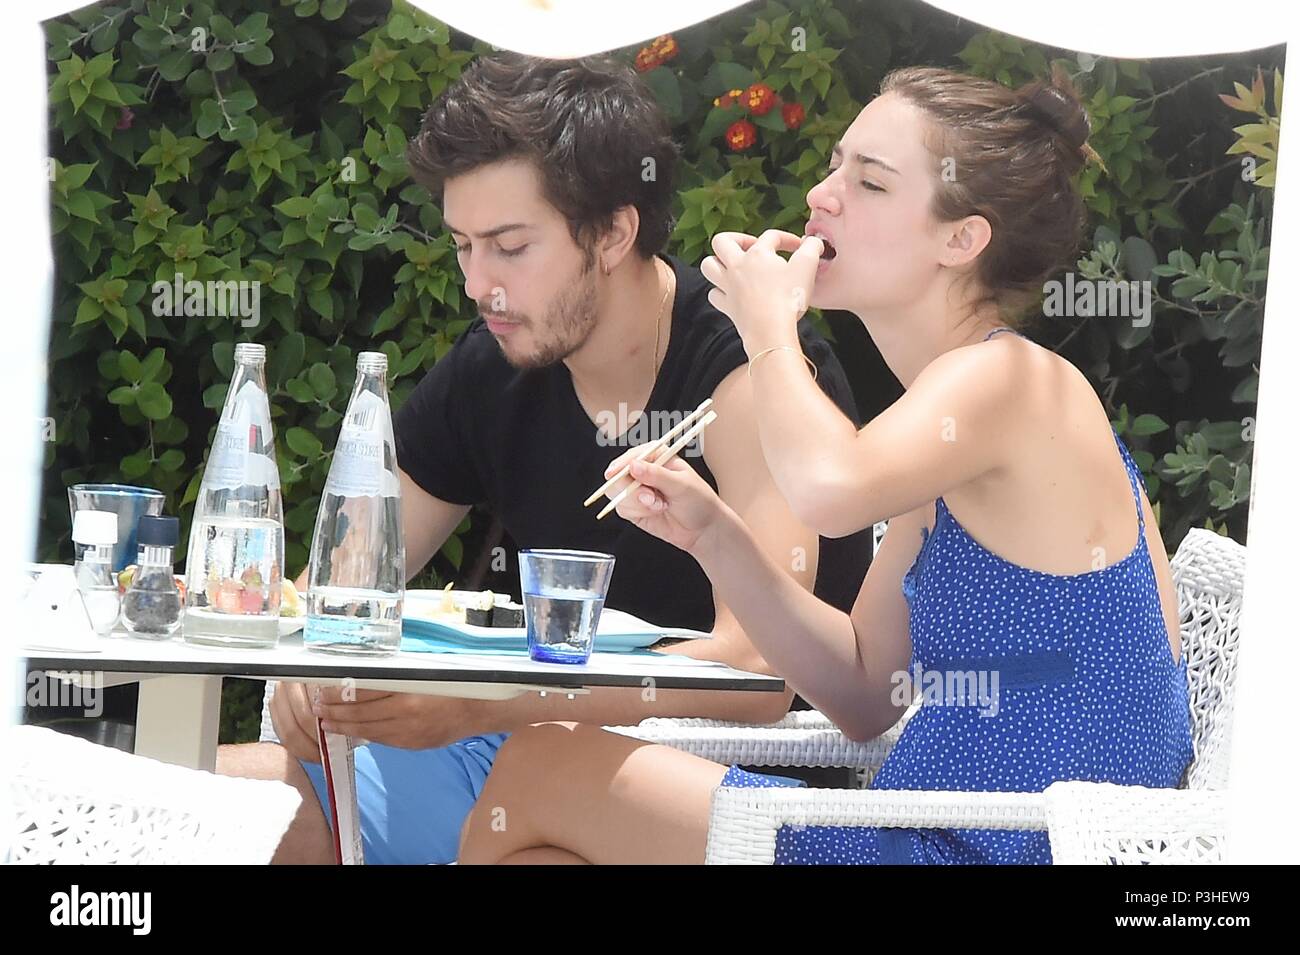 Chaff, Italy. 18th June, 2018. Pula Nat Wolff and girlfriend. In the